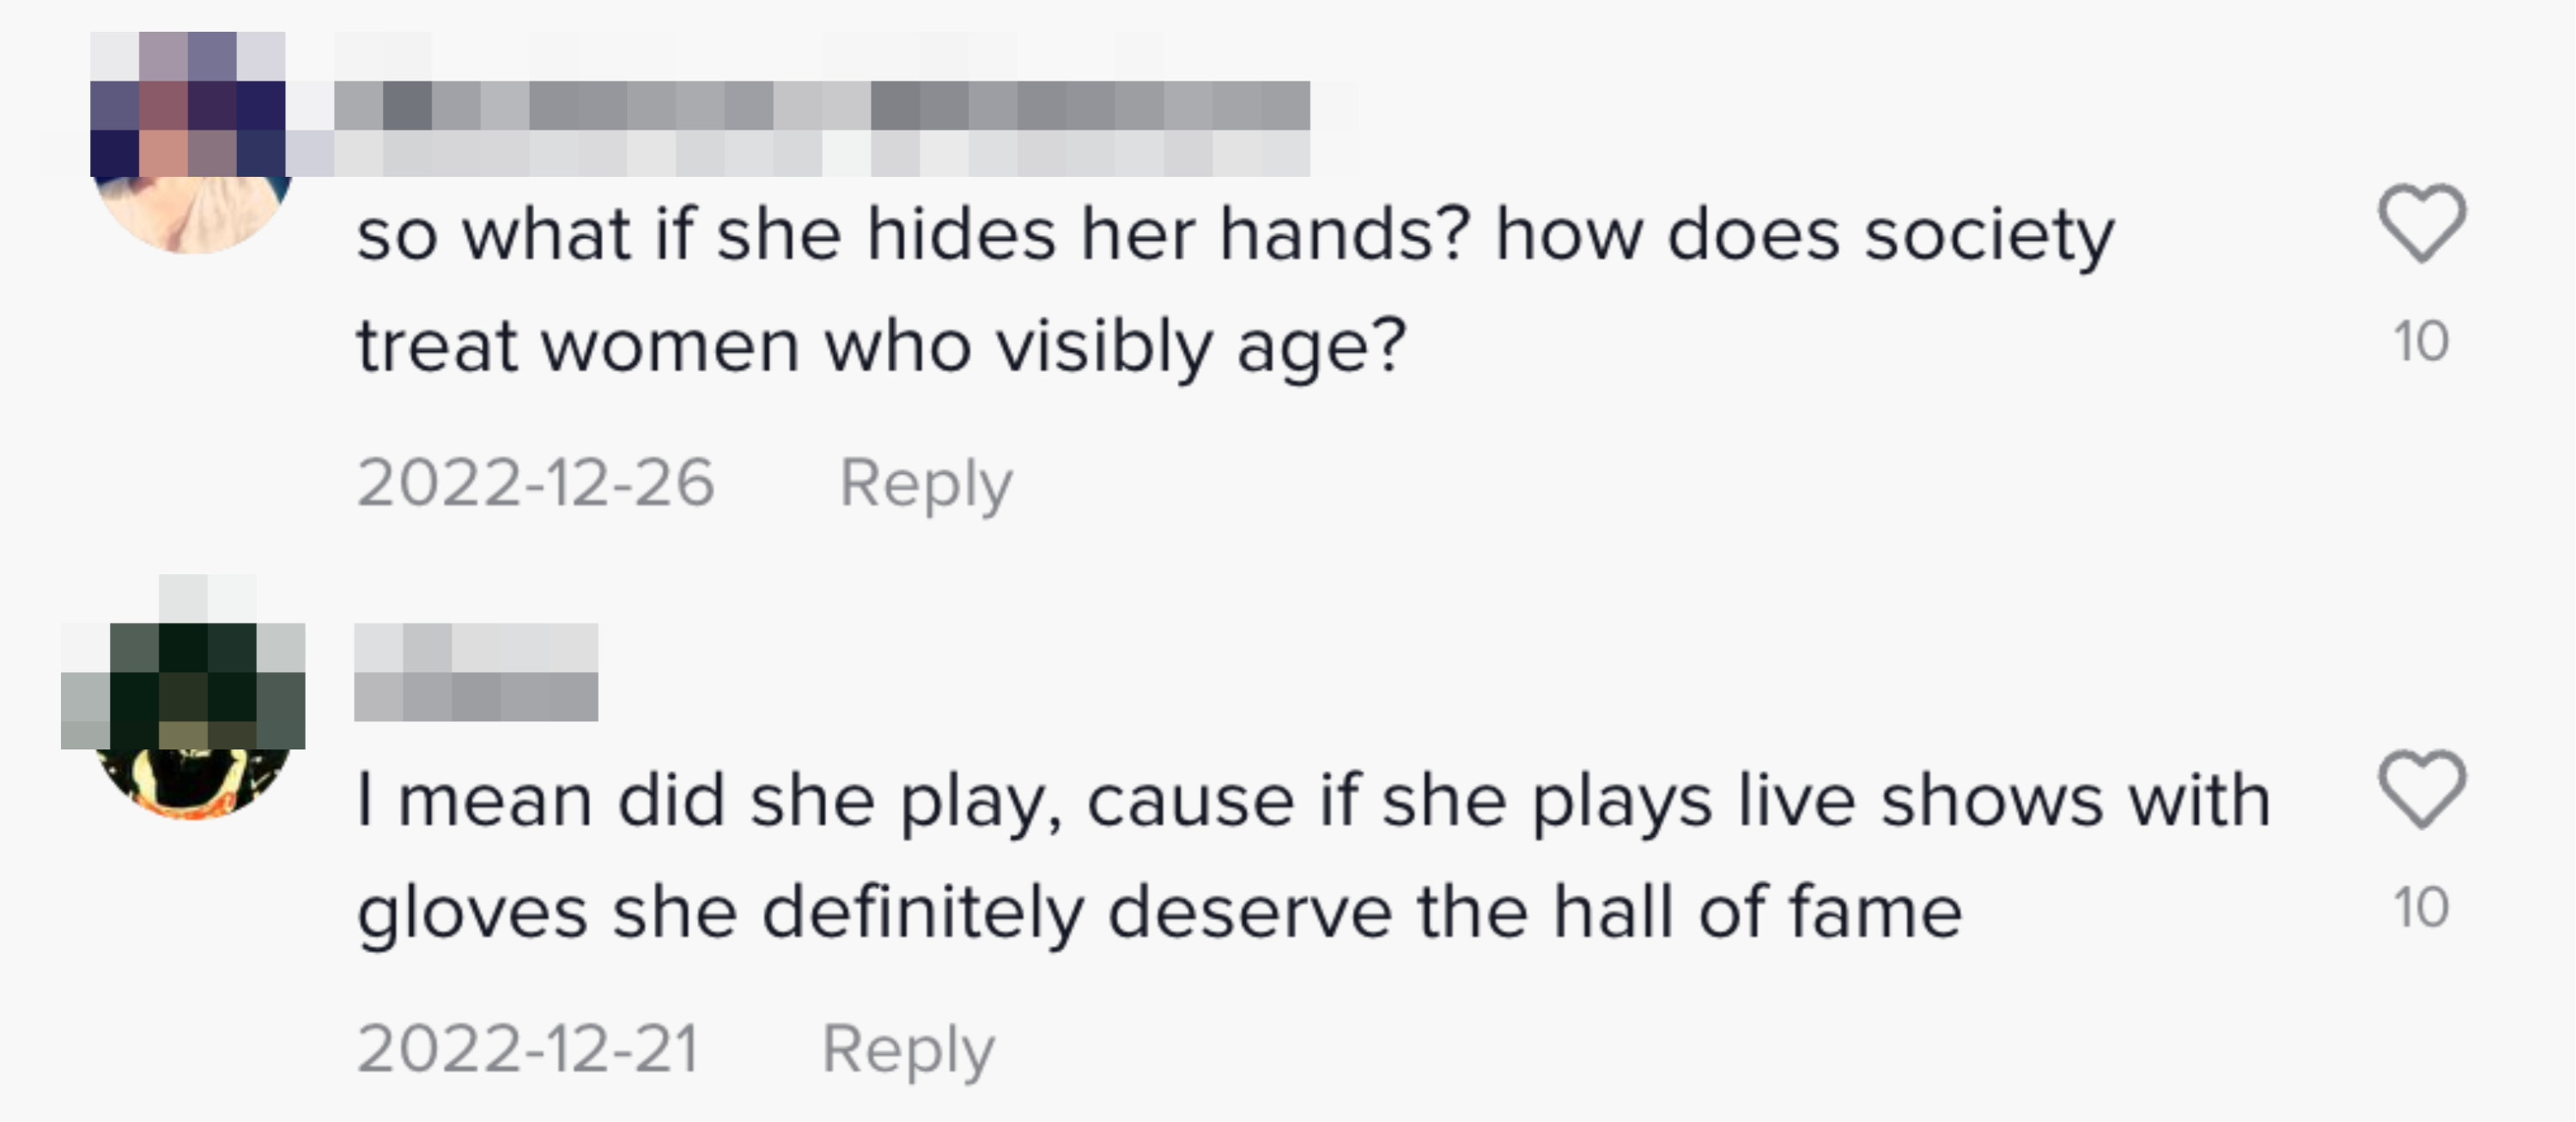 One person commented, &quot;so what if she hides her hands? how does society treat women who visibly age?&quot;